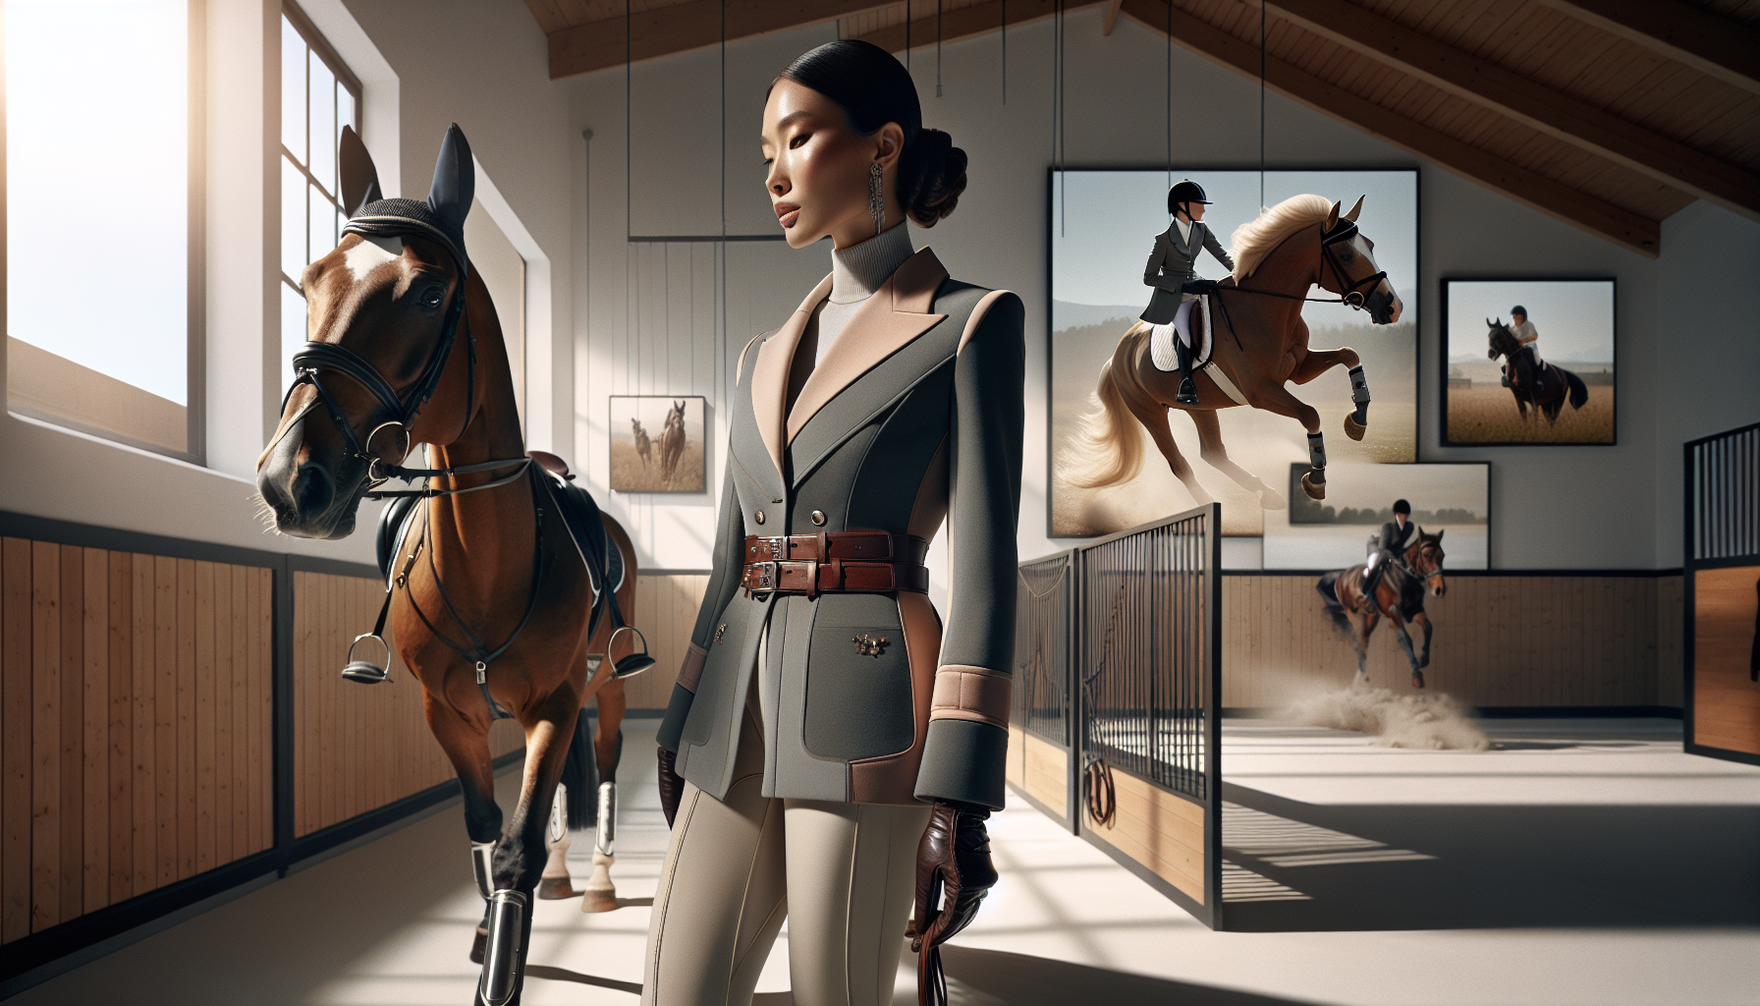 An image depicting equestrian fashion mixed with a contemporary aesthetic. In the foreground, an Asian woman dressed in a classic riding jacket and breeches, featuring sleek lines and modern stylish u